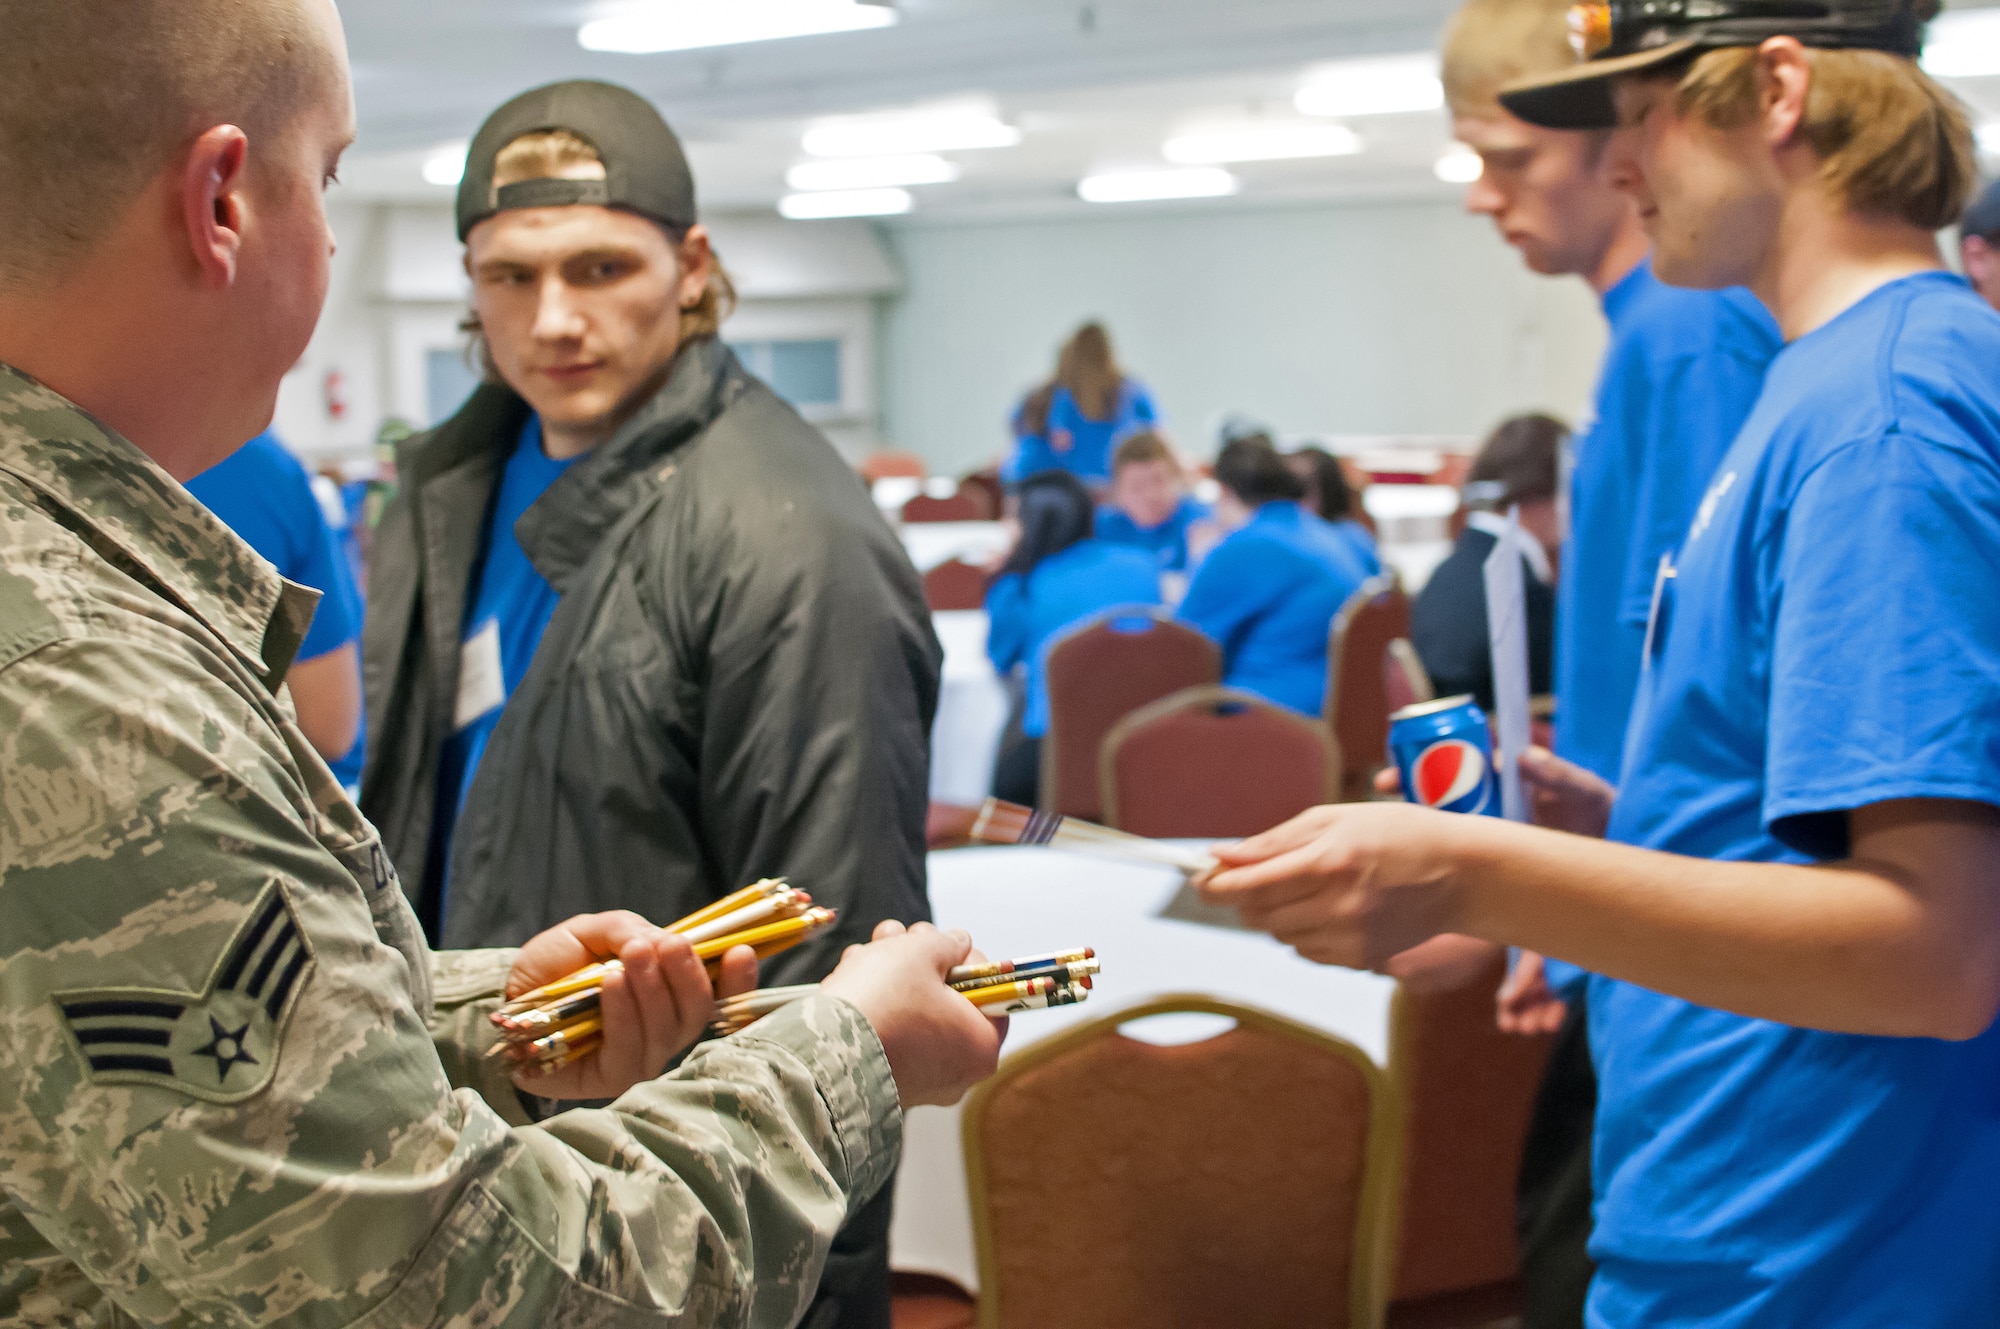 U.S. Air Force Airmen assigned to 153rd Maintenance Group, Wyoming Air National Guard, hand out test materials to students competing in the SkillsUsa competition, Apr. 13, 2015 in Casper, Wyoming. SkillsUSA Wyoming is a career-technical student organization serving students in secondary and post-secondary technical, skilled, service, and health occupations. (U.S. Air National Guard photo by Tech.Sgt John Galvin/released)